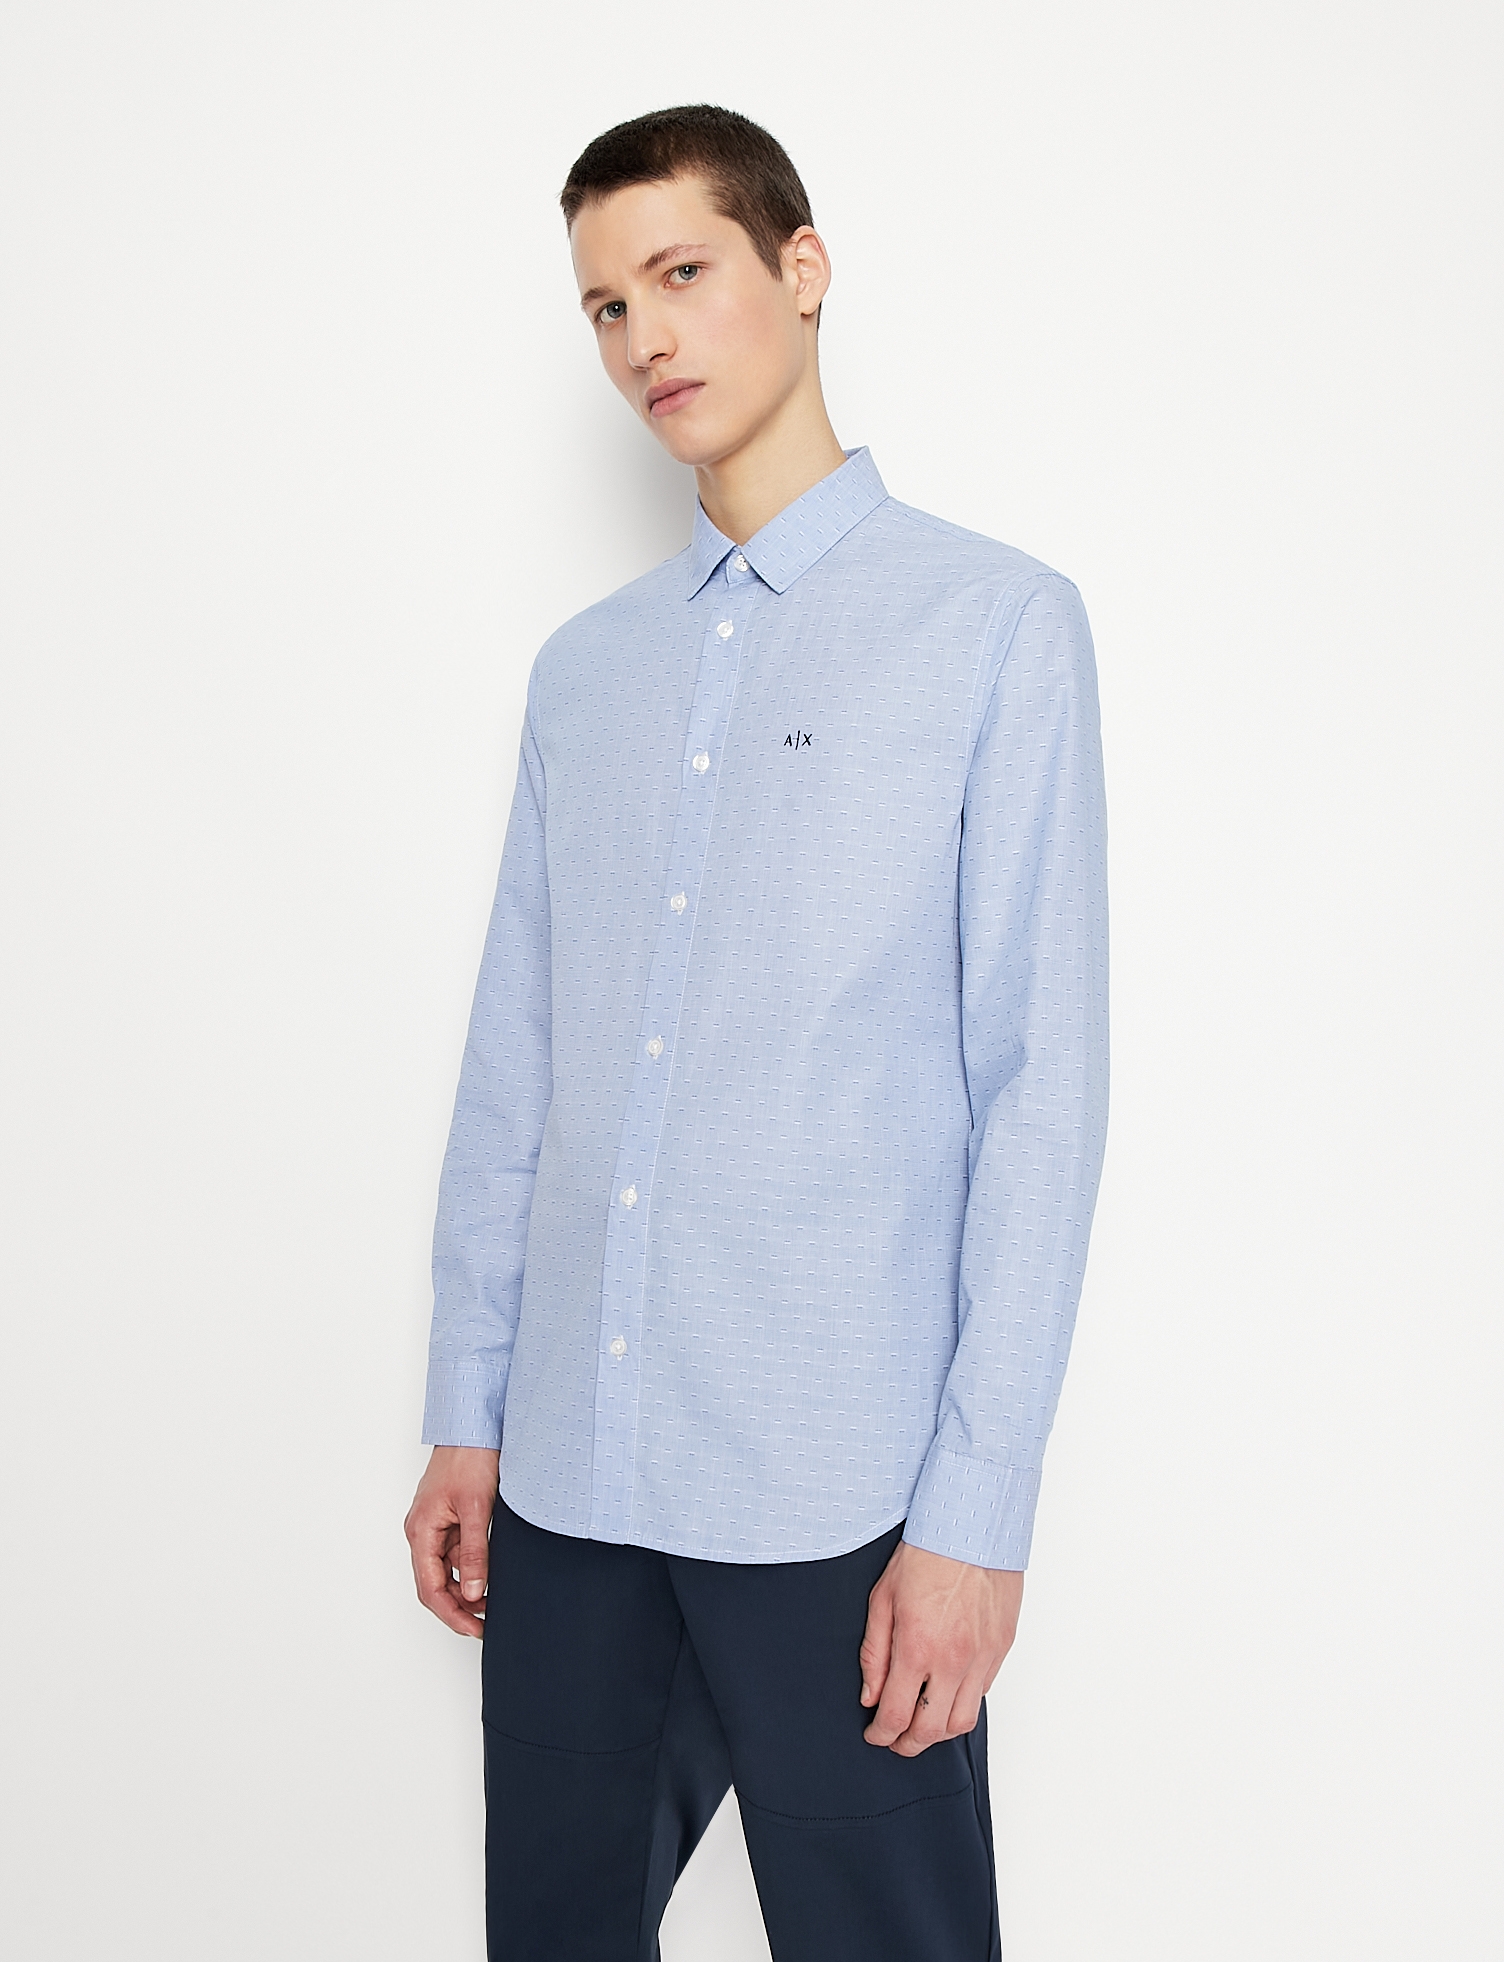 All-Over Printed Regular Fit Spread Collar Shirt